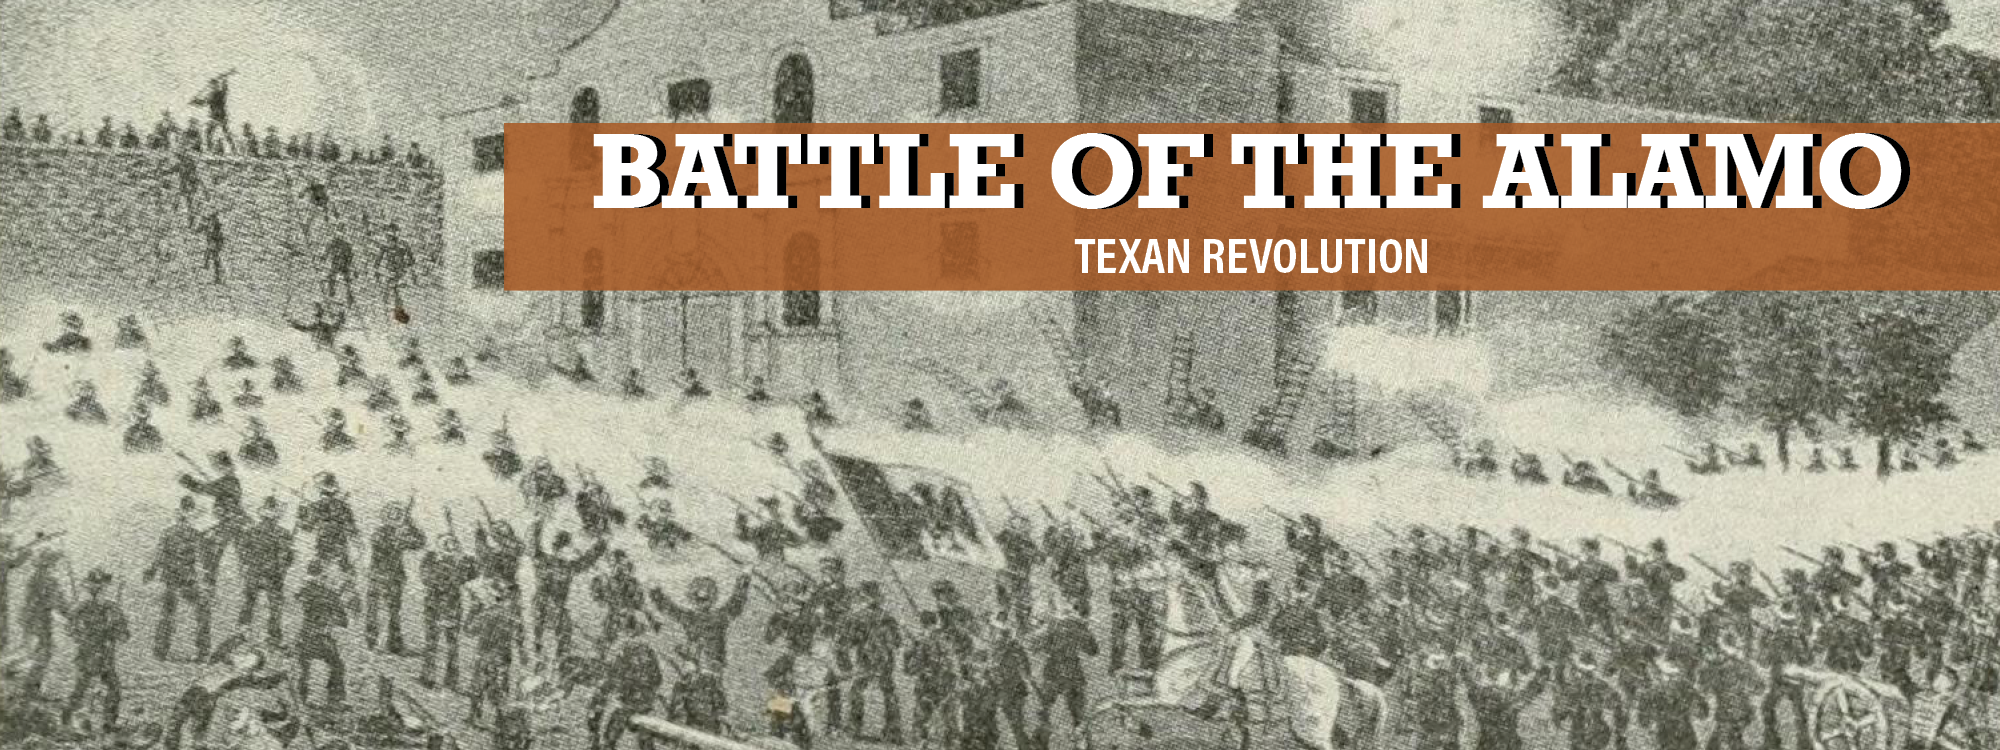 images of the battle of the alamo